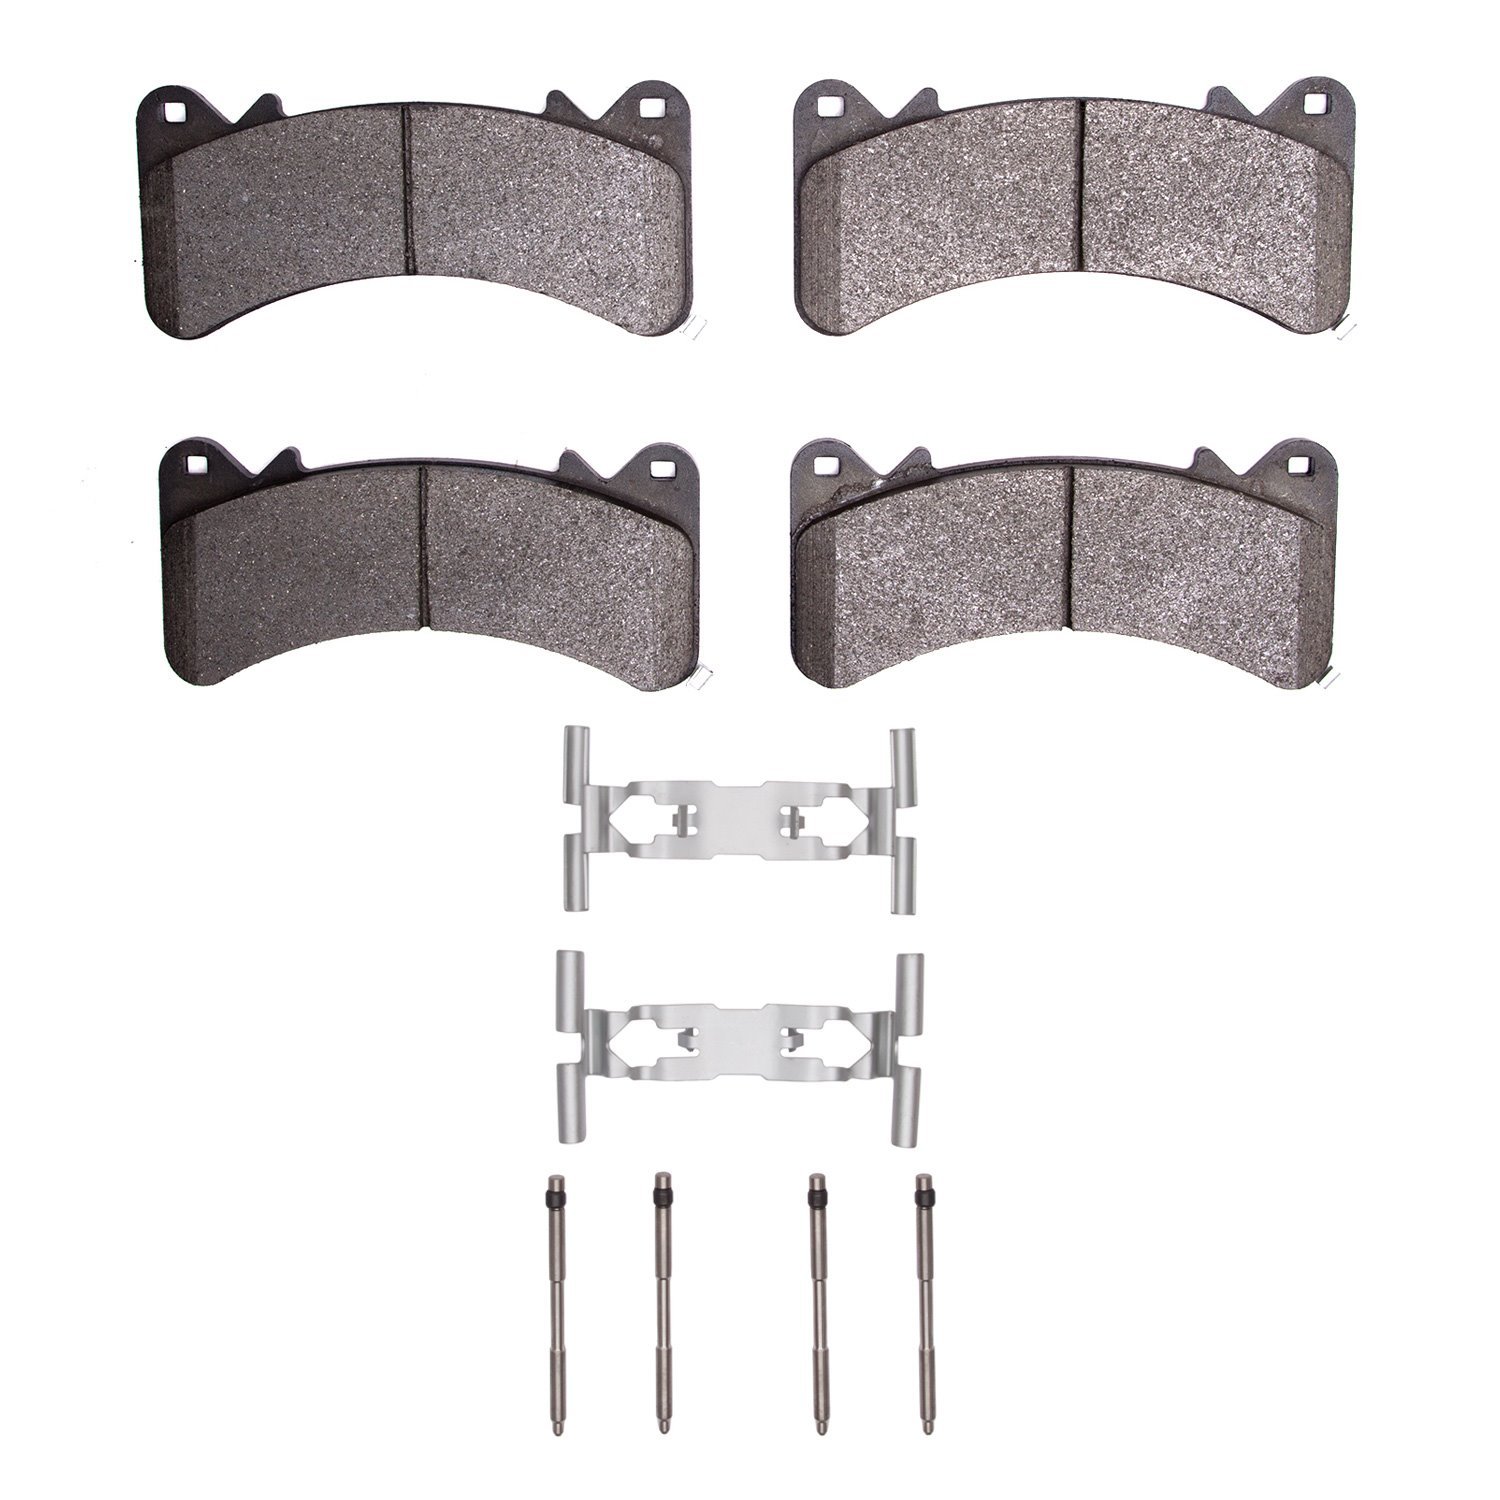 1400-1910-01 Ultimate-Duty Brake Pads & Hardware Kit, Fits Select GM, Position: Front